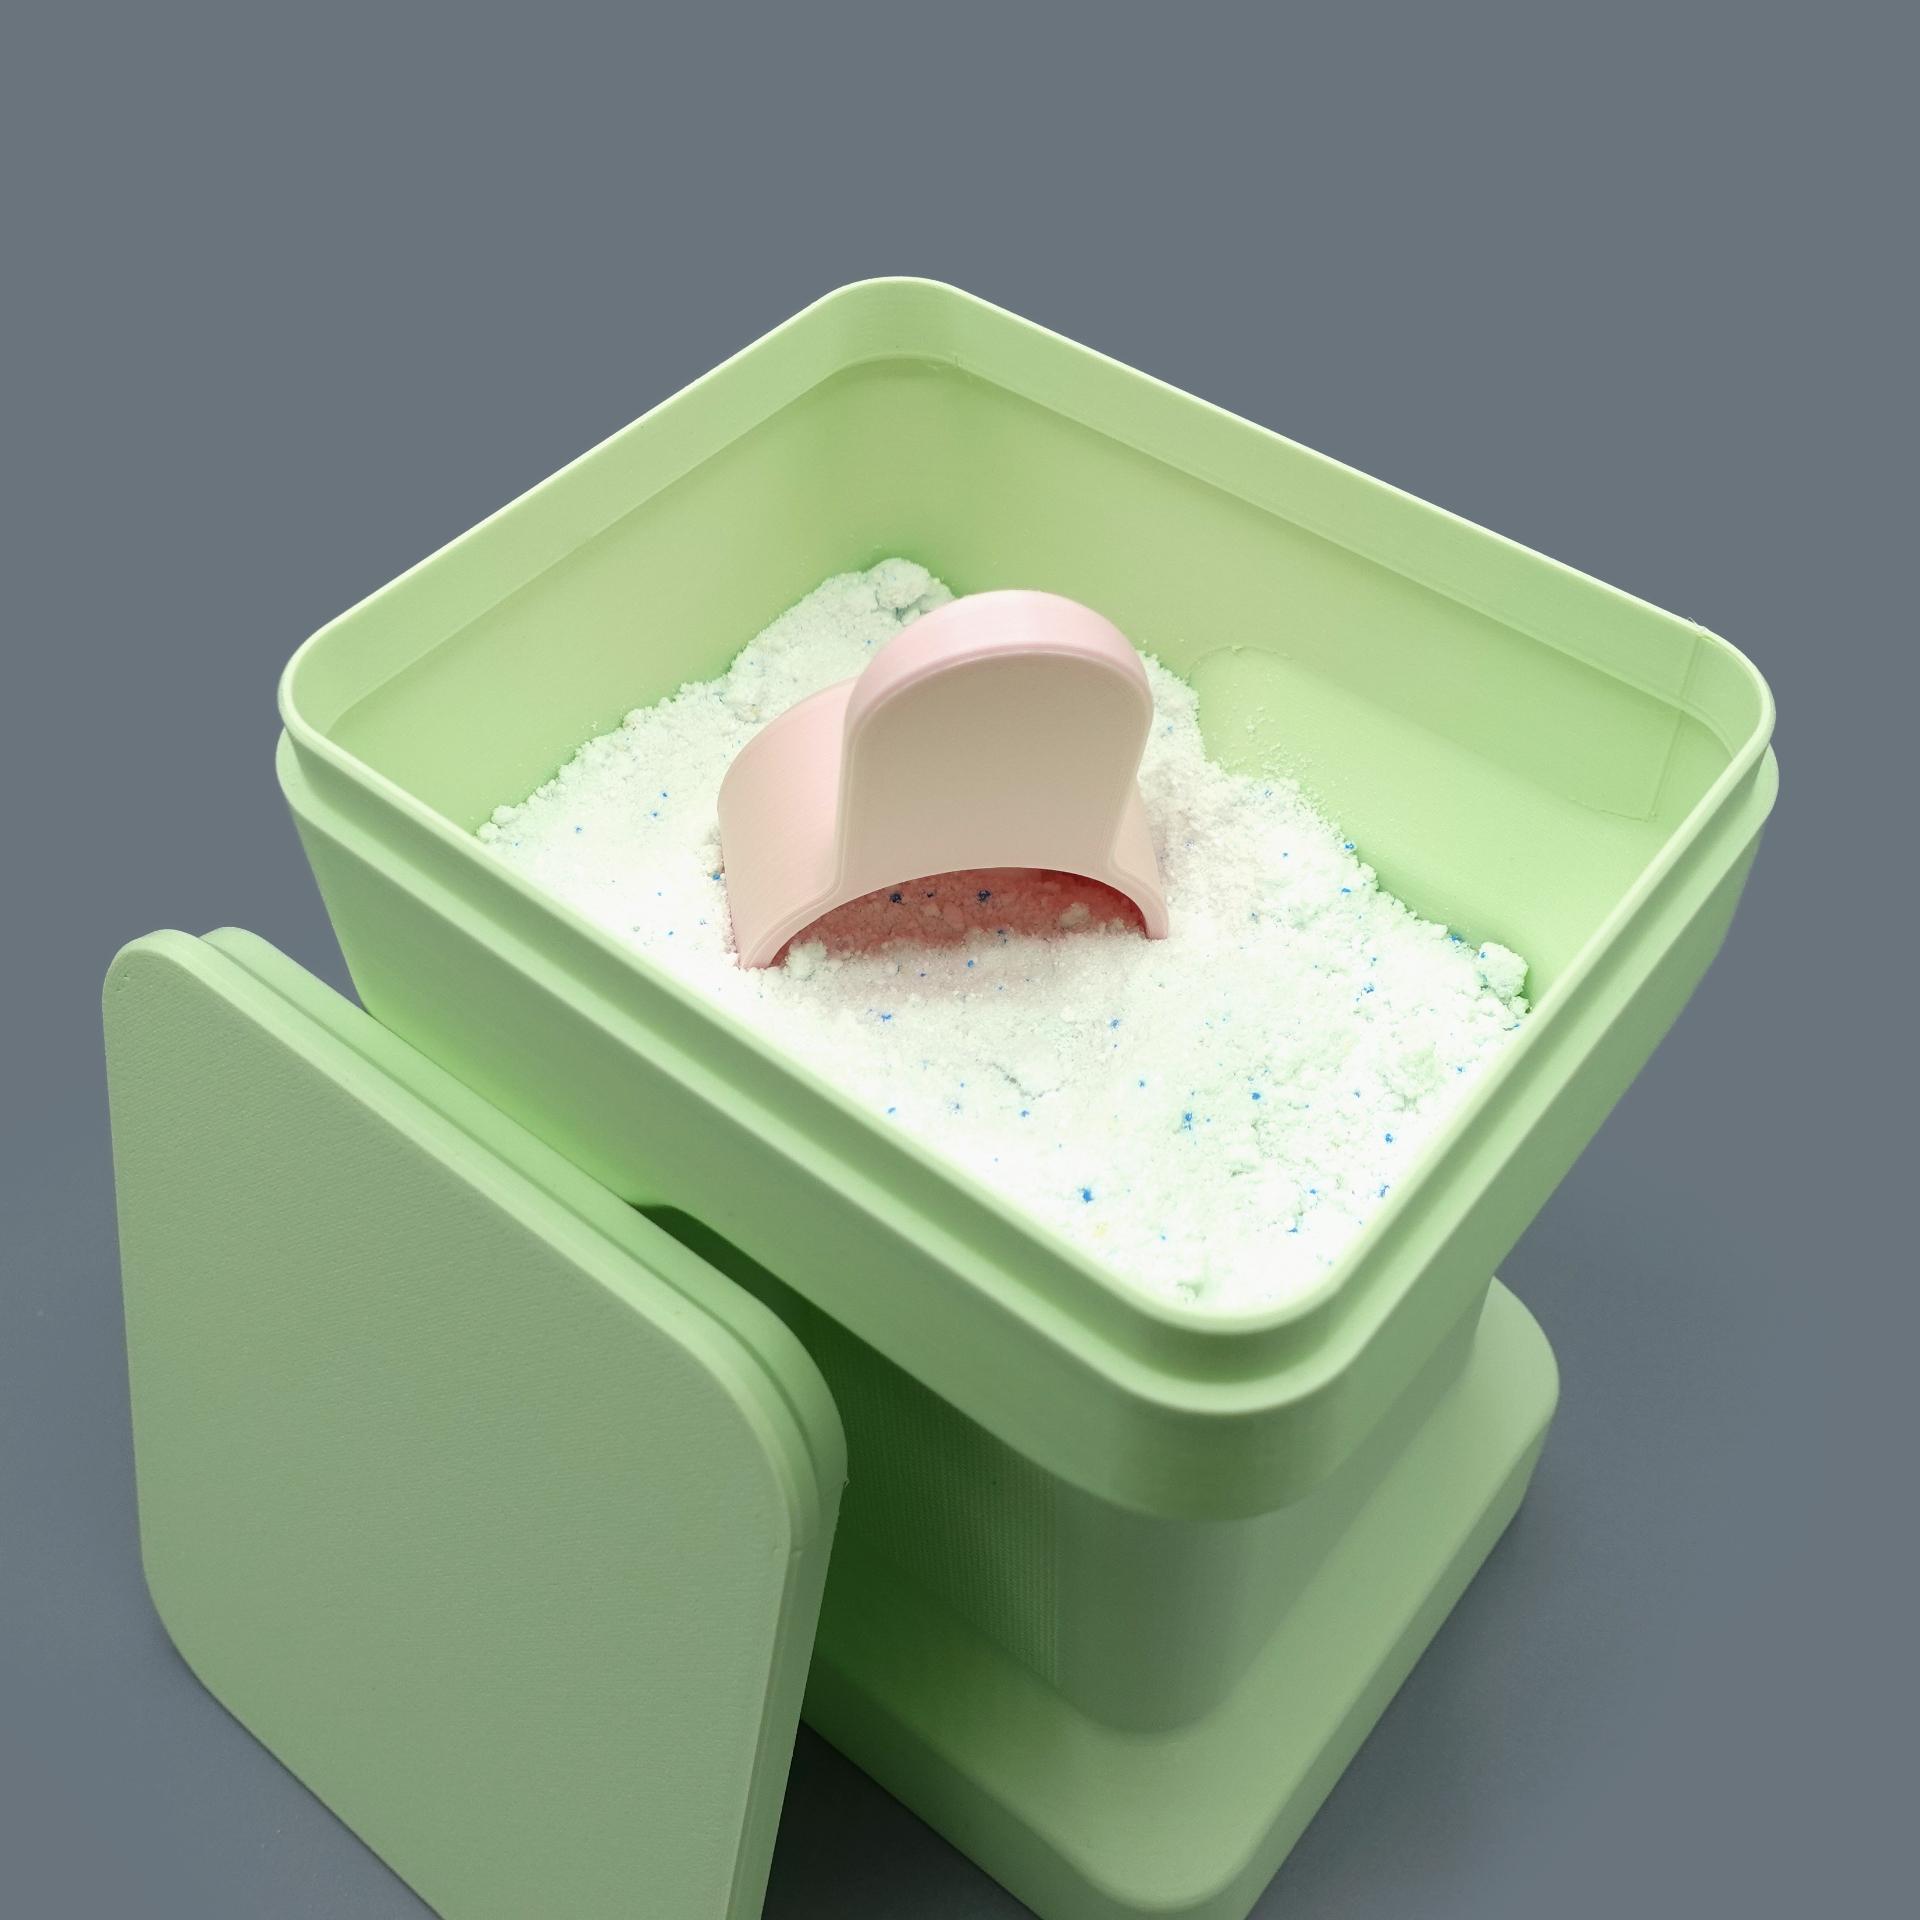 Laundry detergent container 3d model